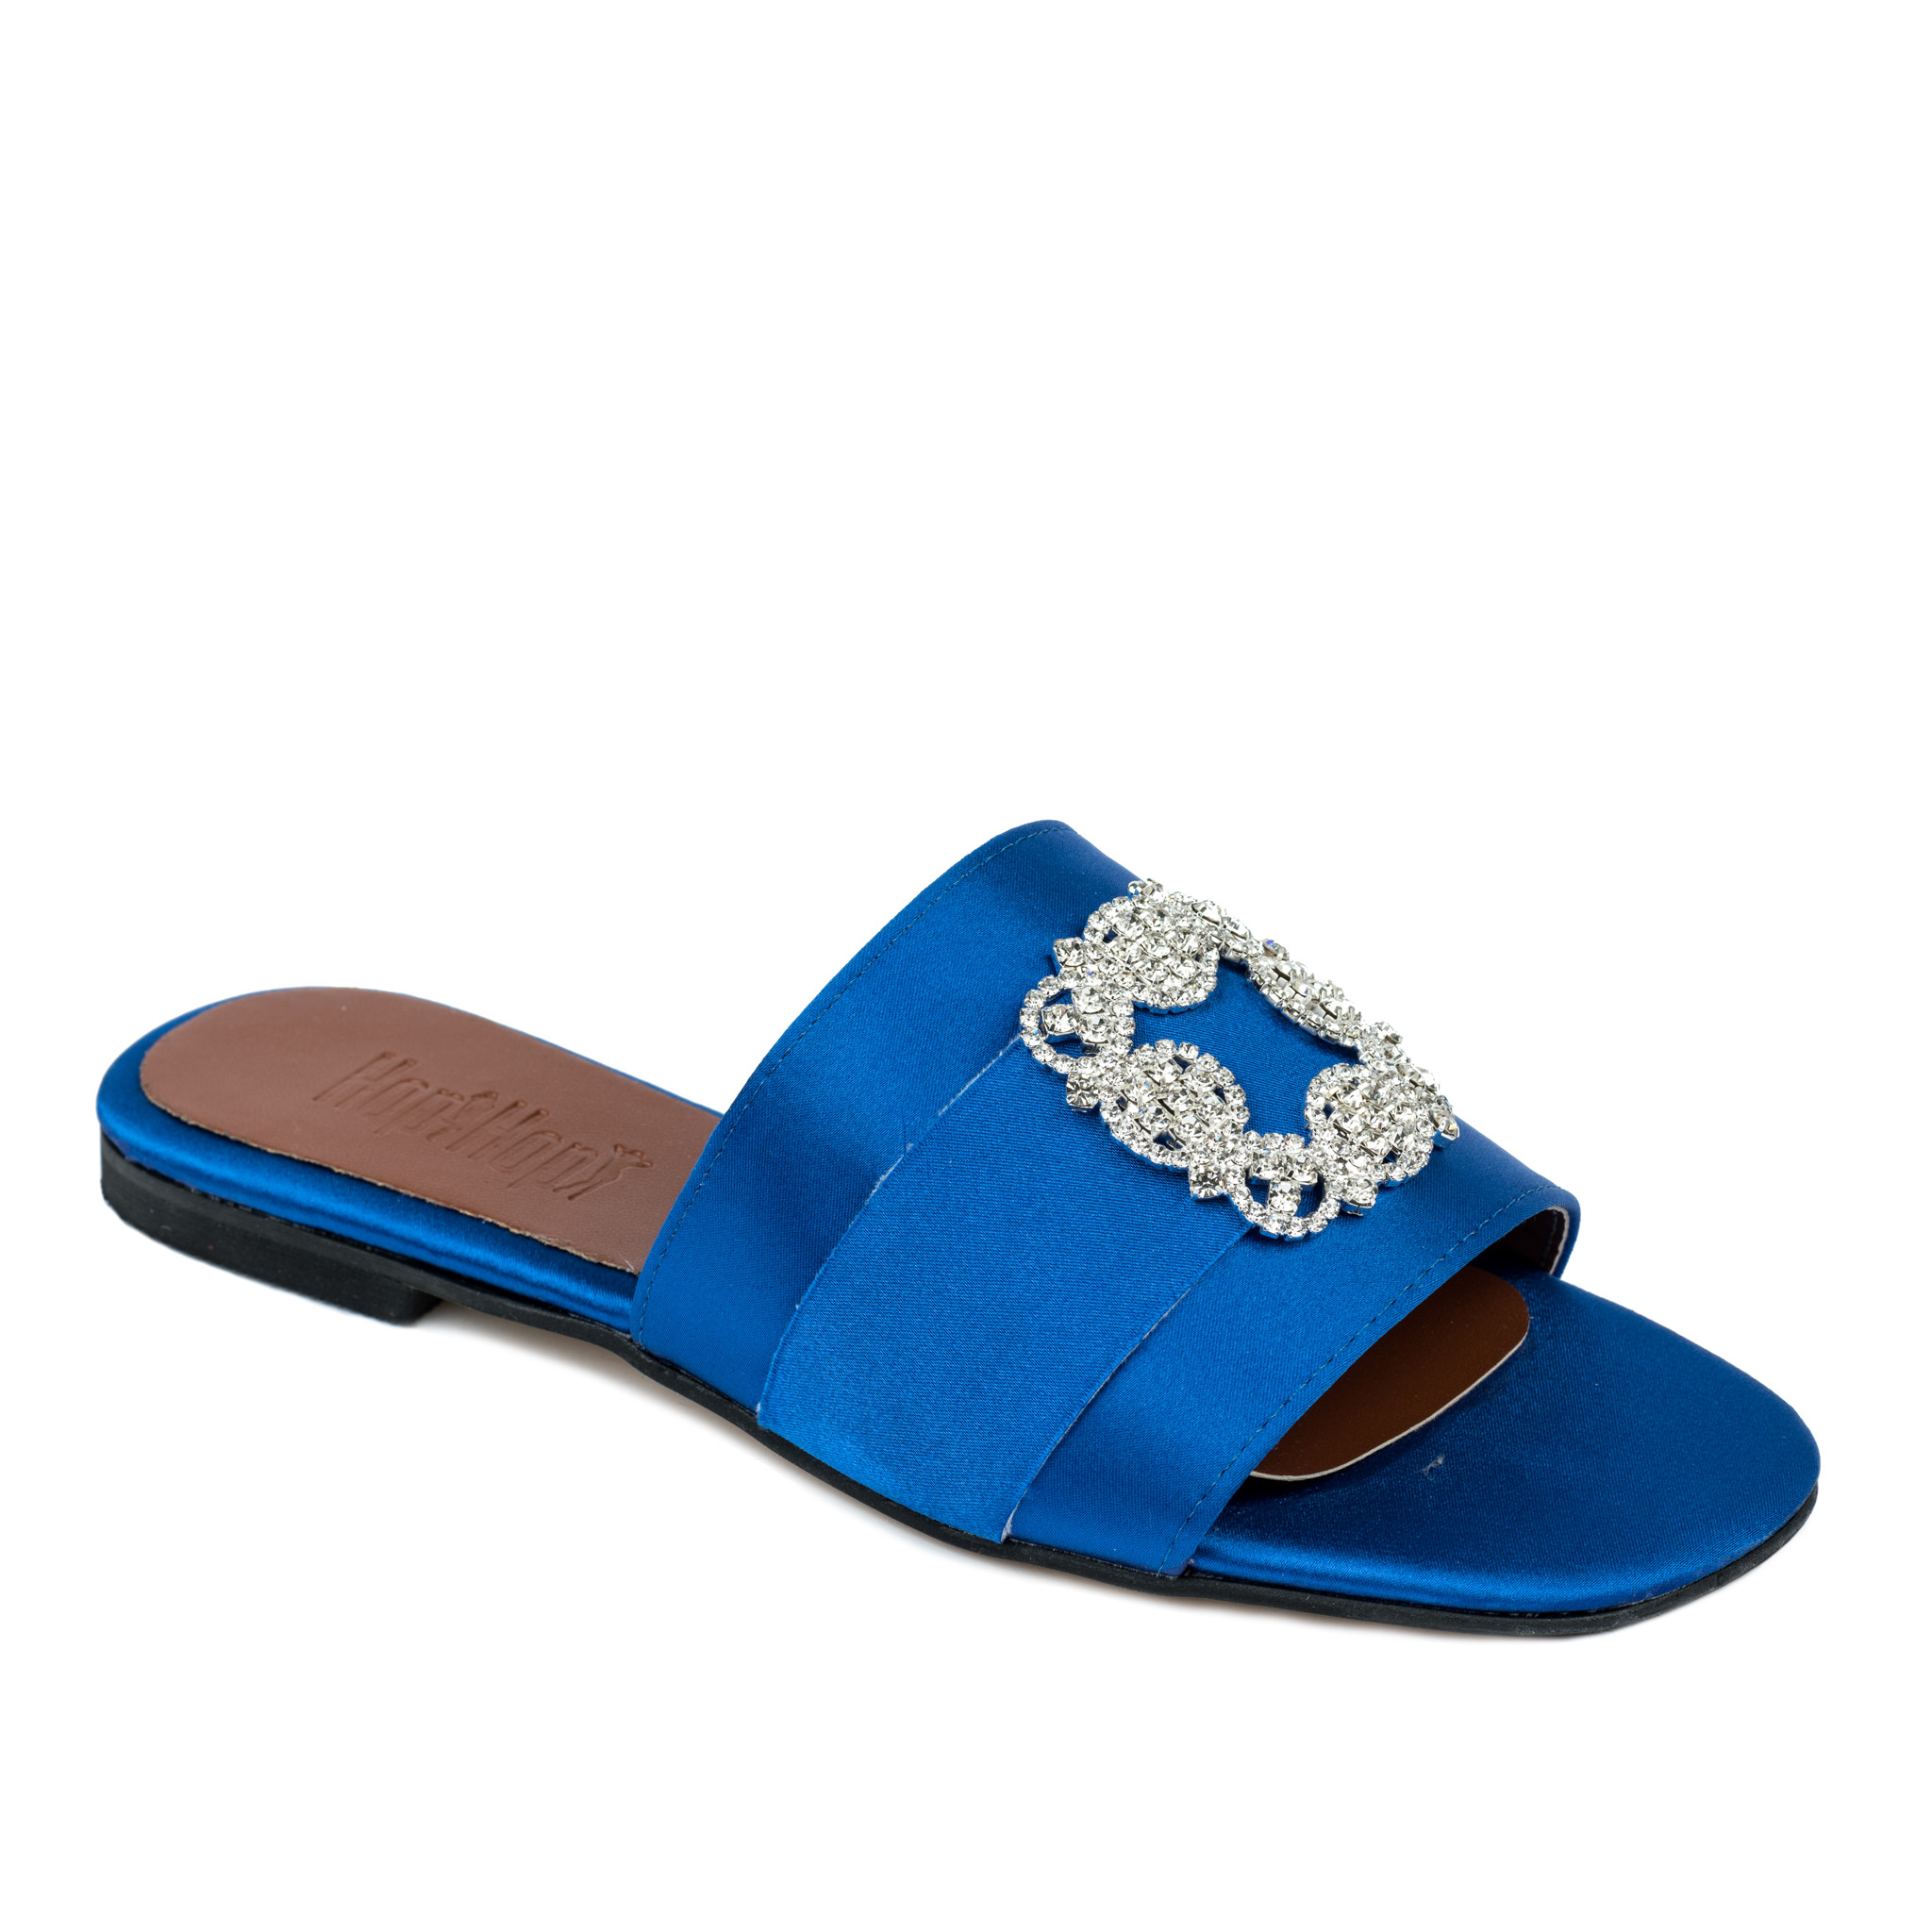 Women Slippers and Mules A438 - BLUE